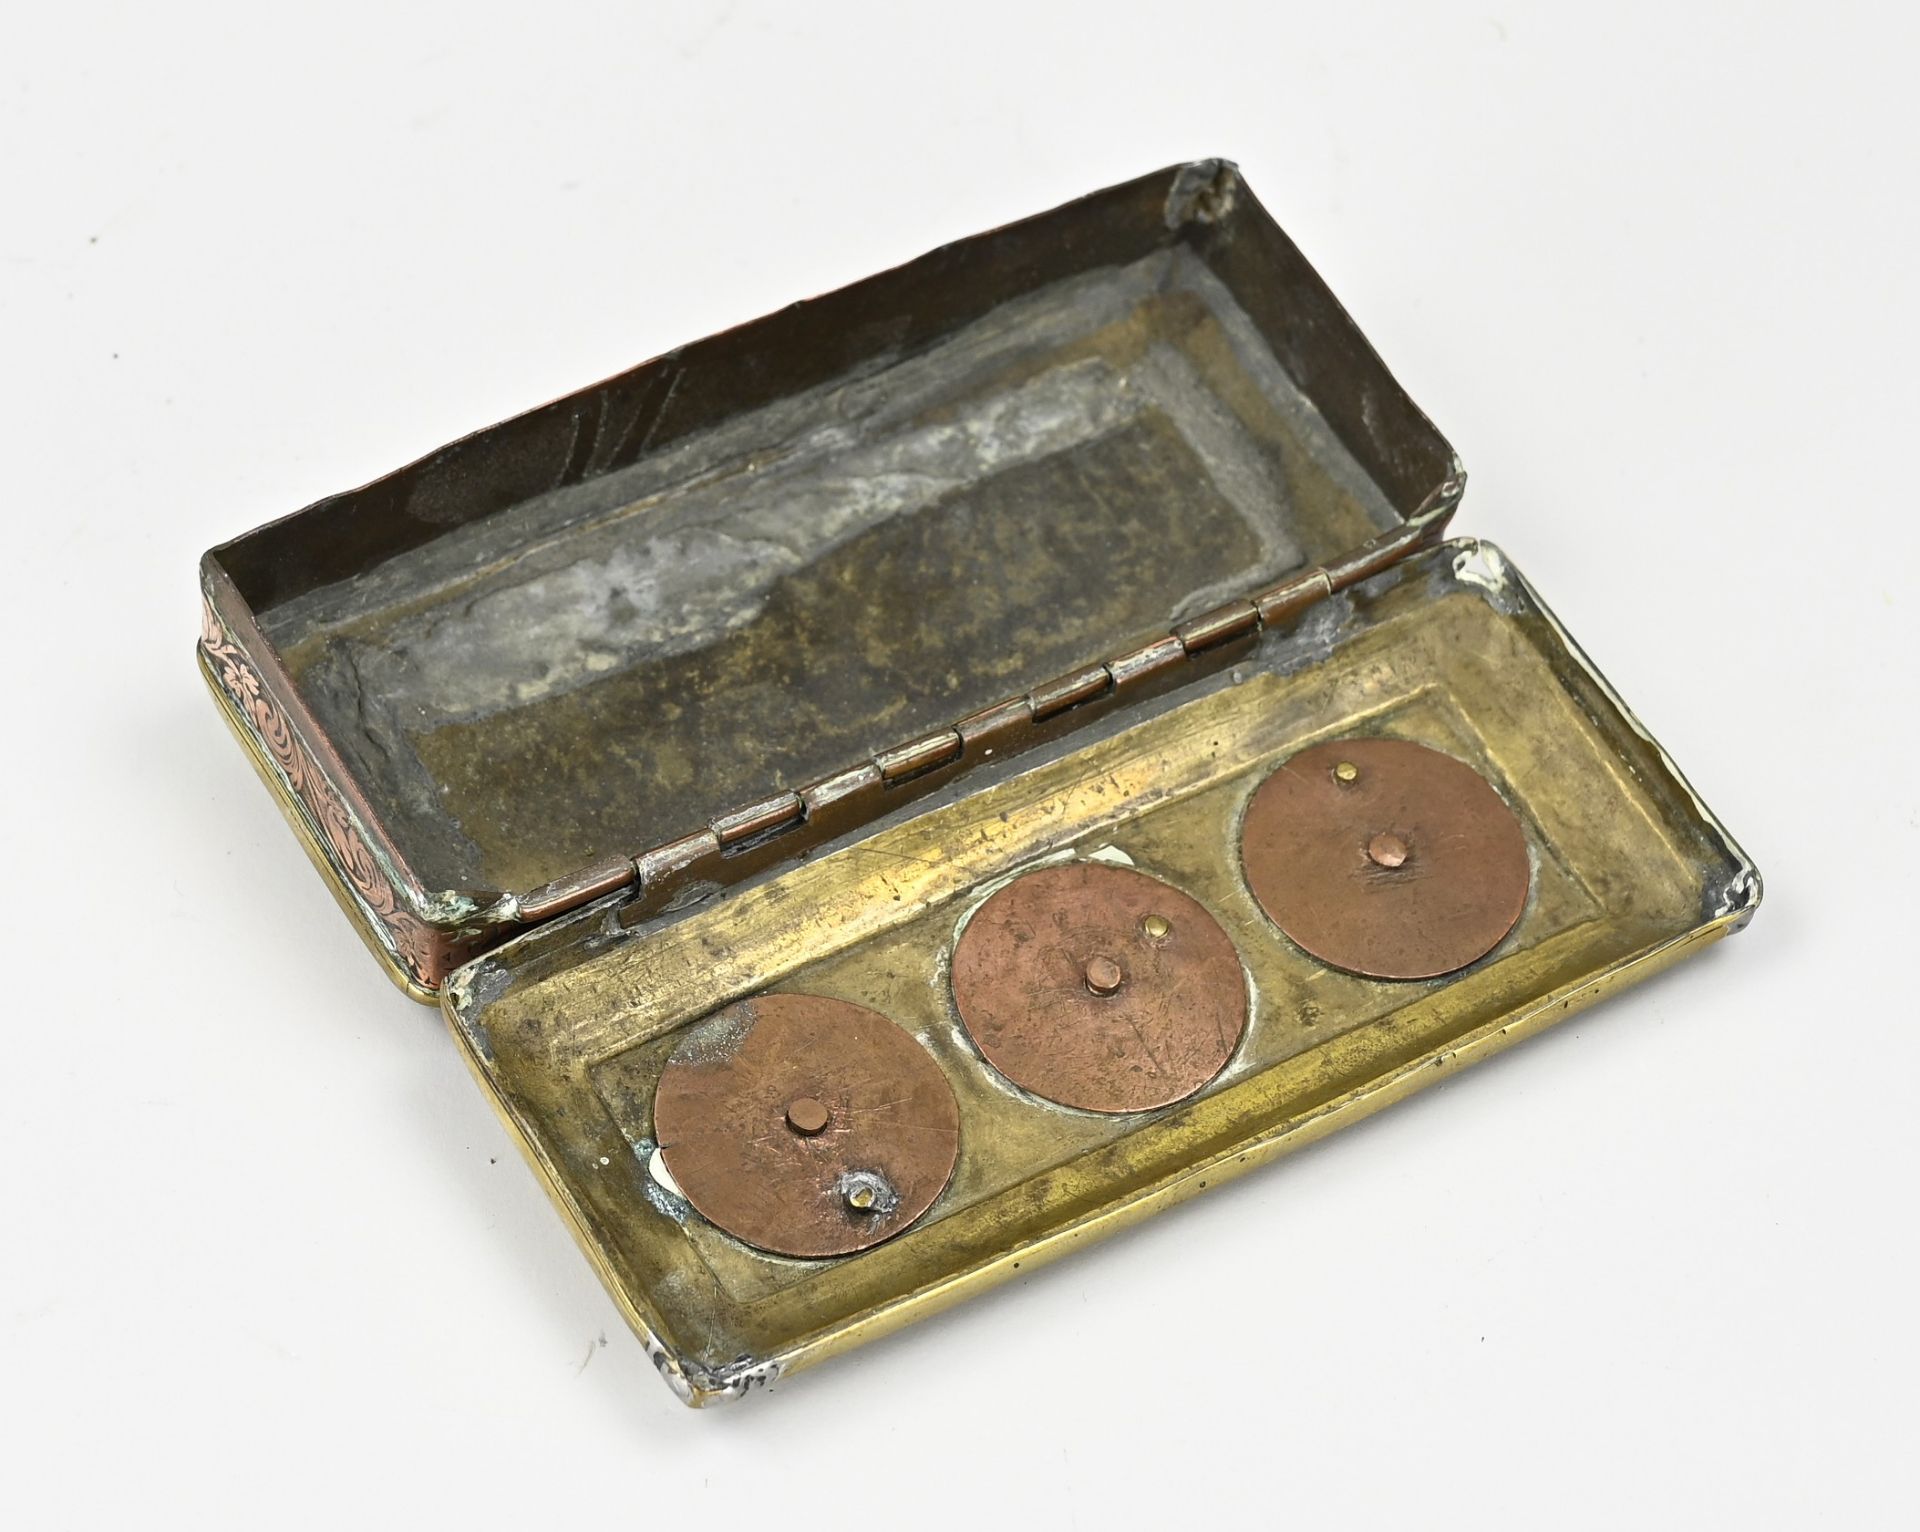 Brass tobacco box with perpetual calendar - Image 2 of 2